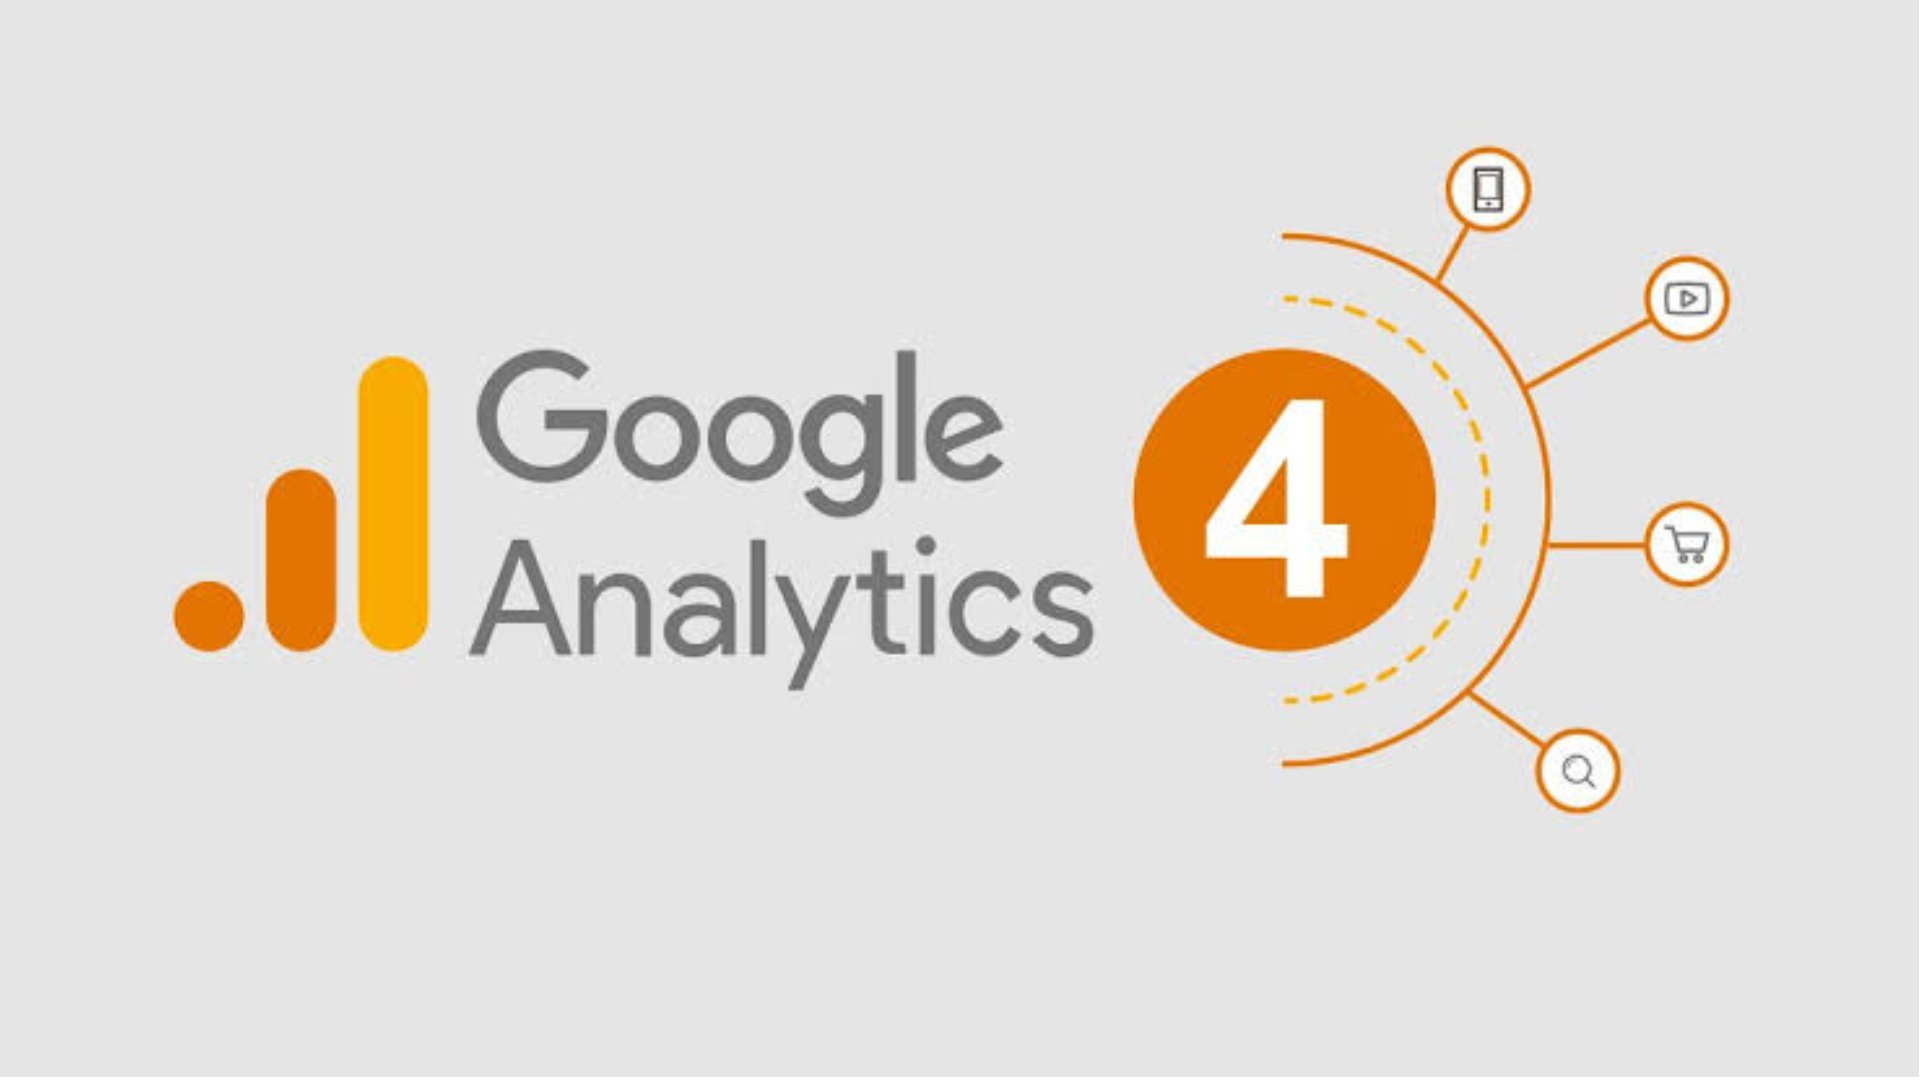 Google Analytics 4: Take action on your Google Analytics account before July 1, 2023